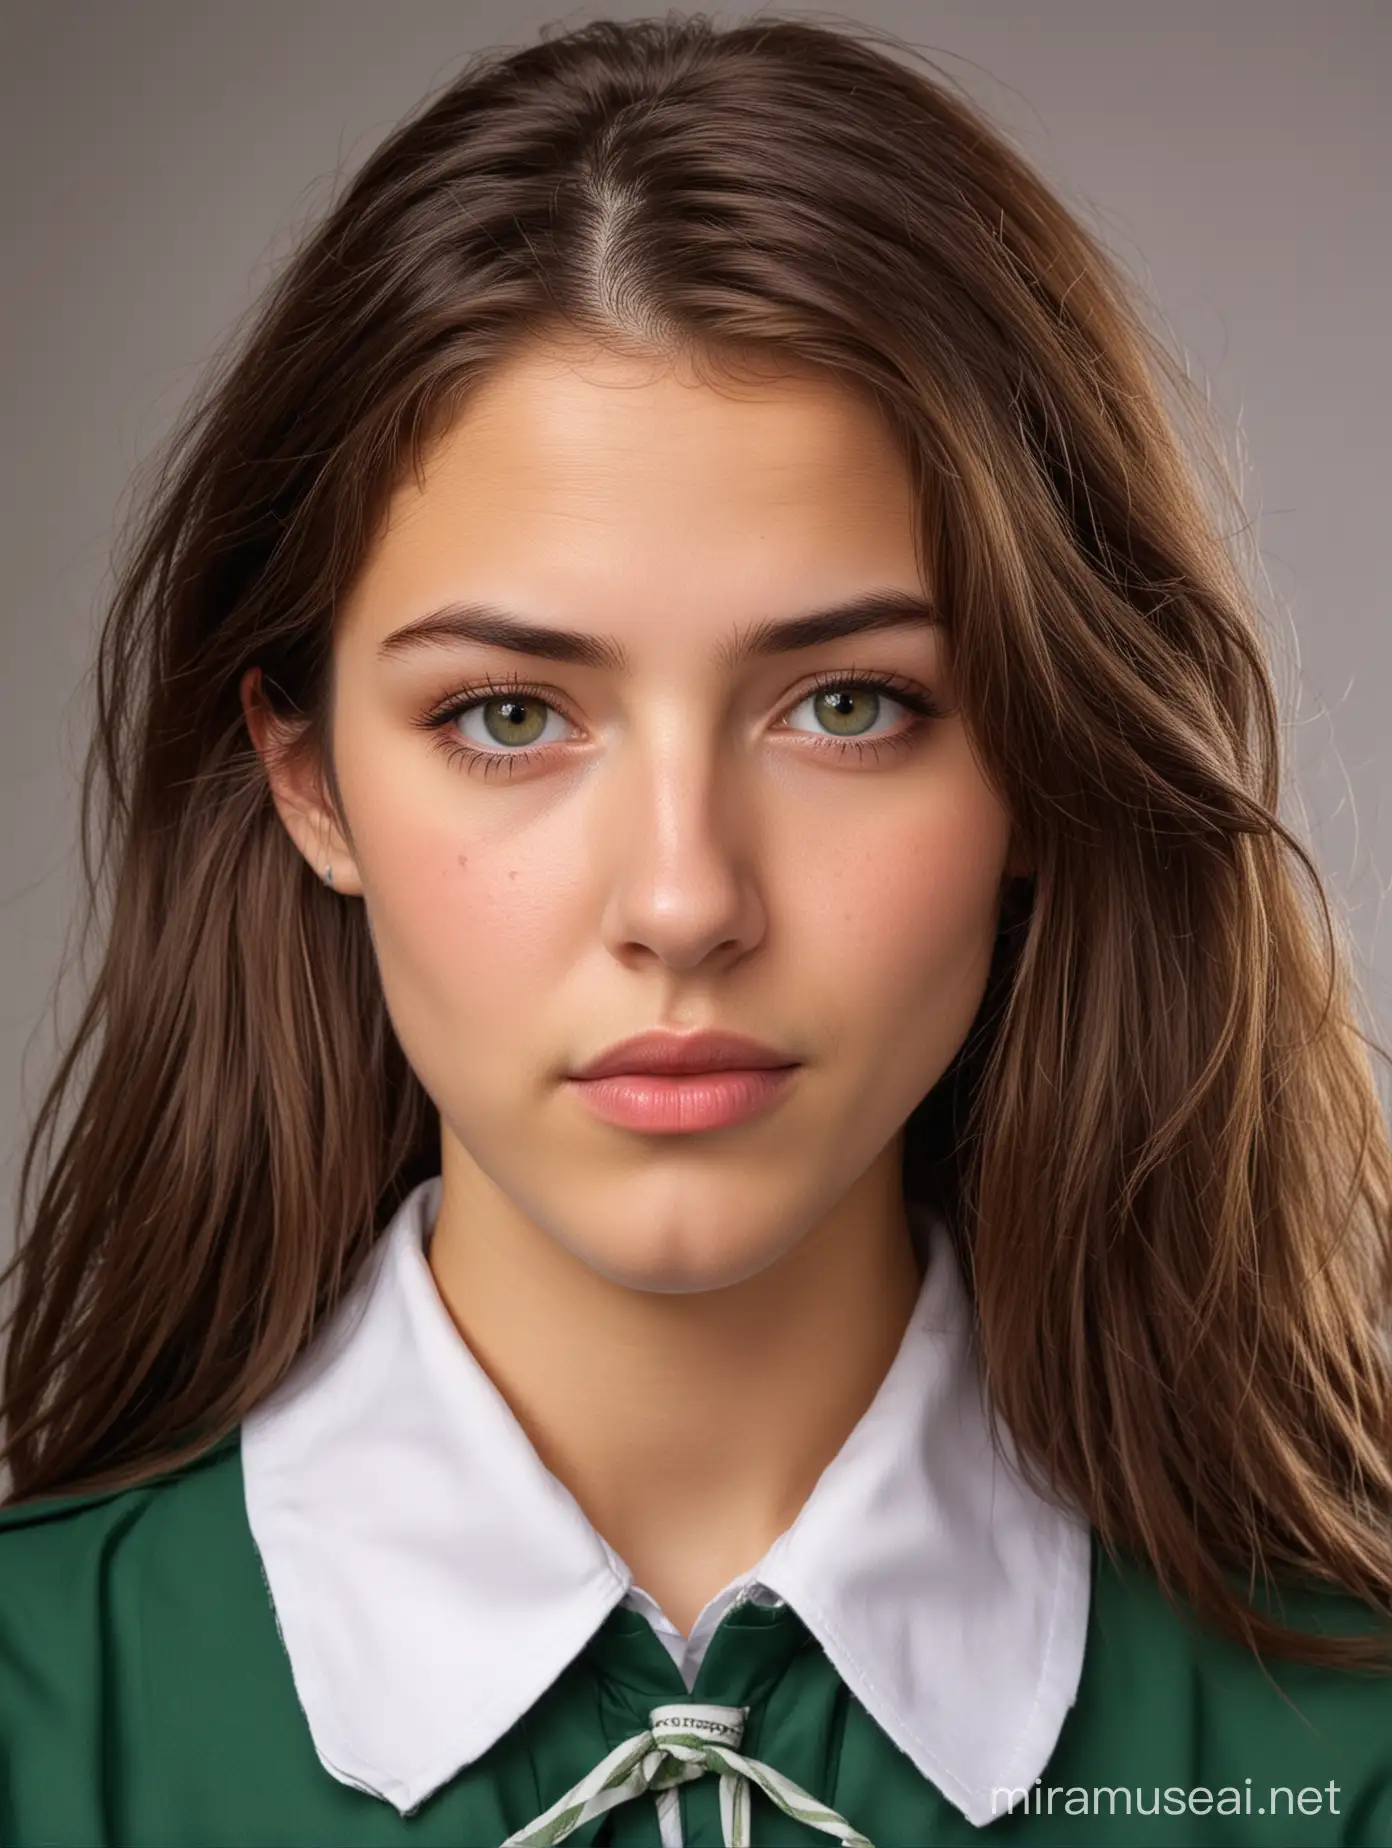 A pretty woman. She is 18 years old. She has shoulder-length brown hair. Her eyes are green. Her expression shows she is pout. She is wearing a school uniform.